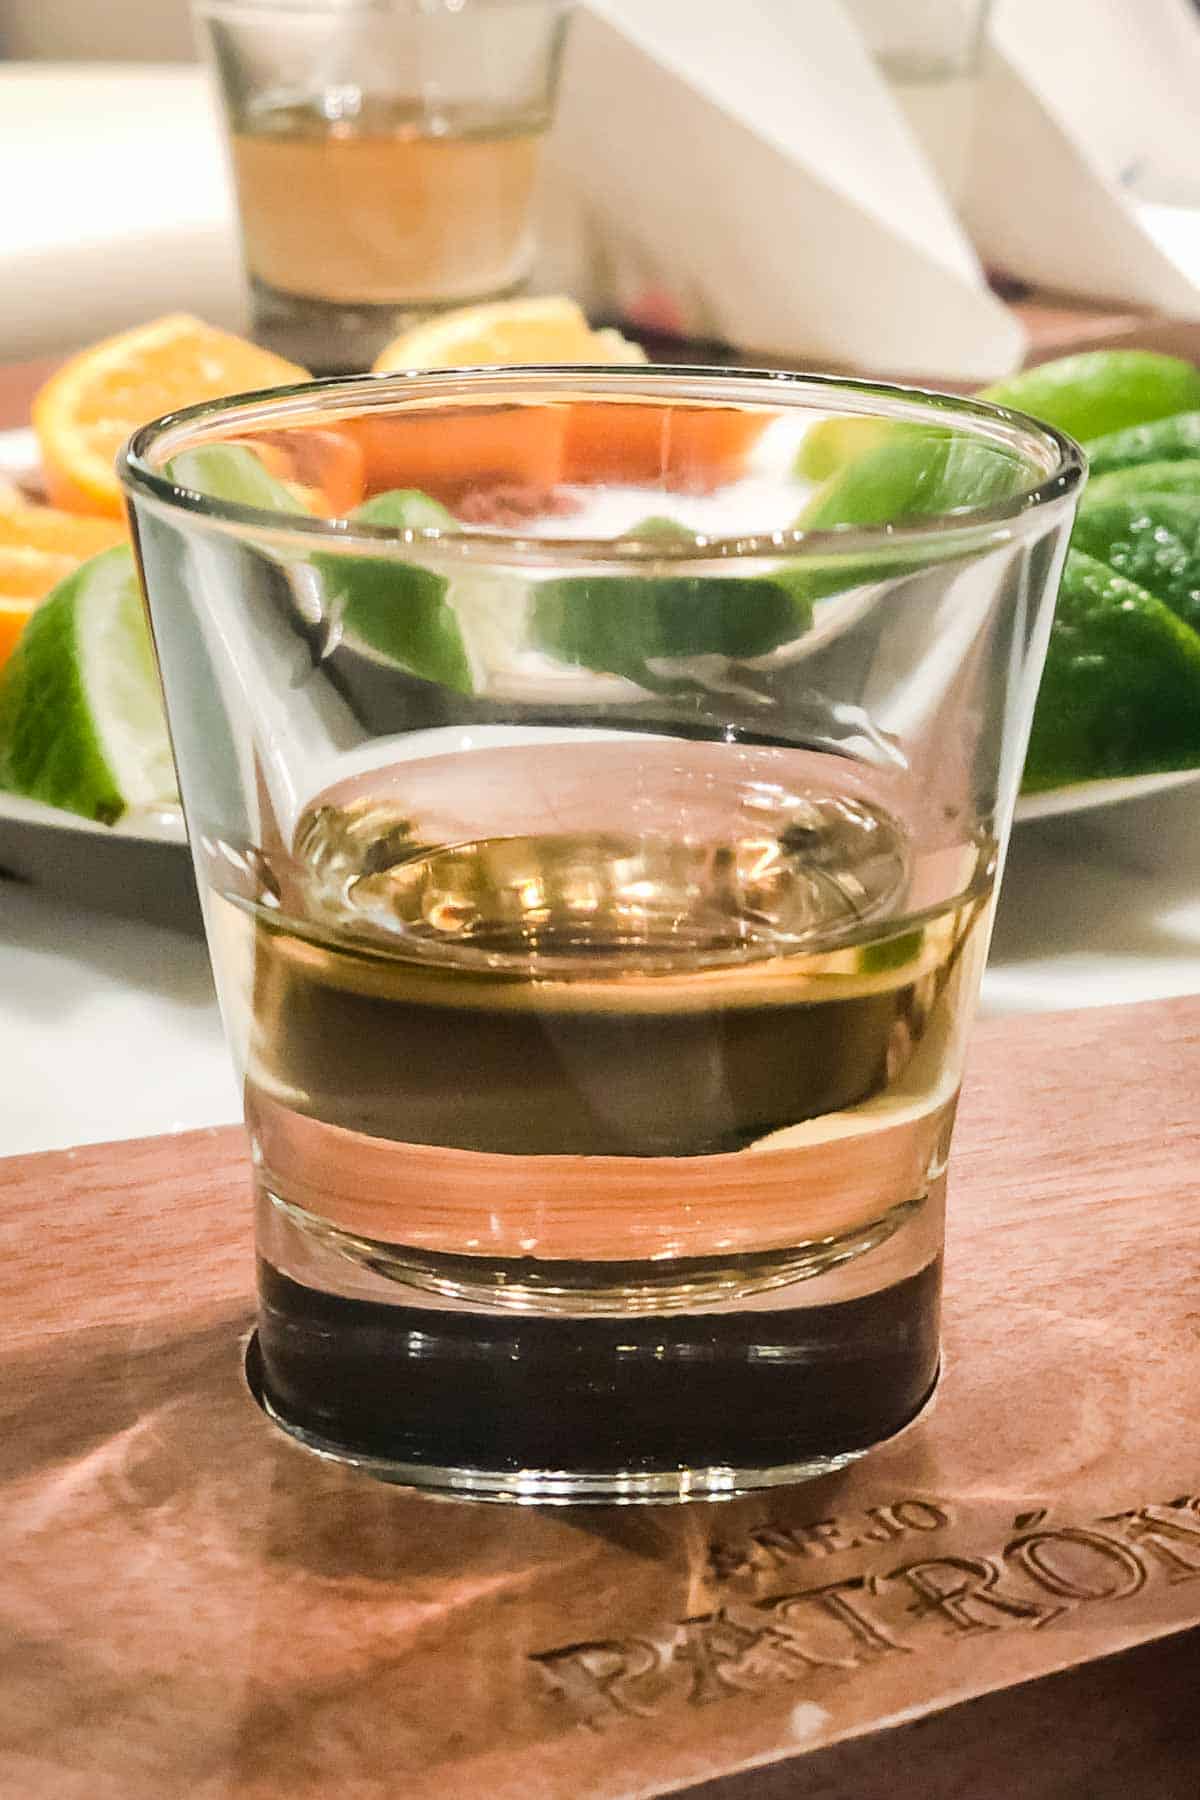 A shot glass of tequila on a wooden board with a plate of lime and orange wedges behind it.